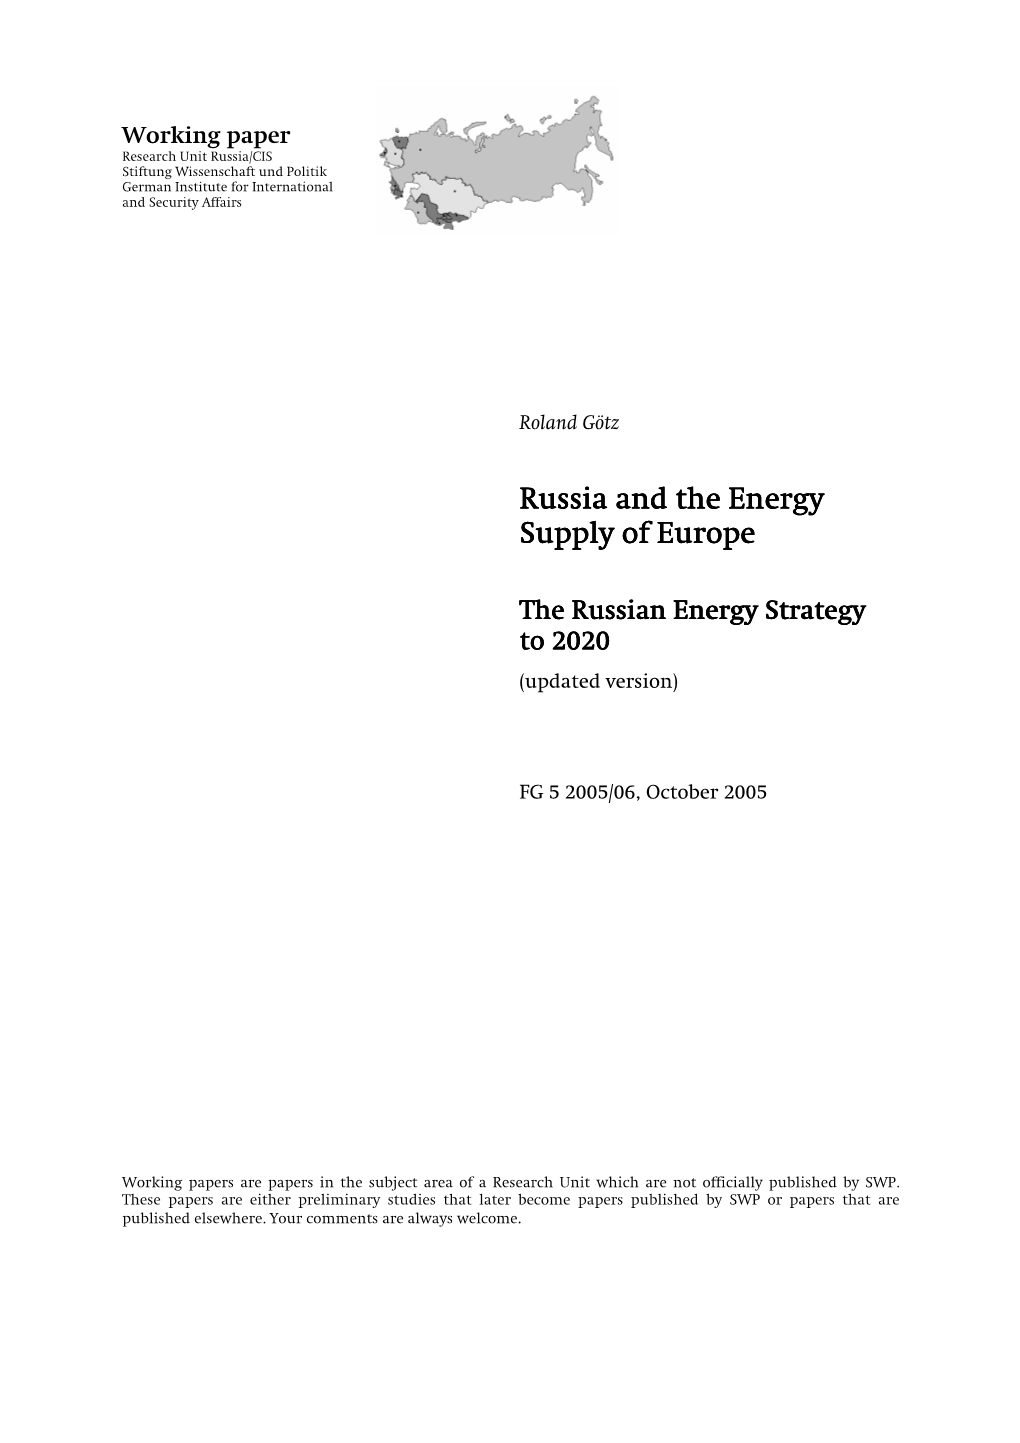 Russia and the Energy Supply of Europe